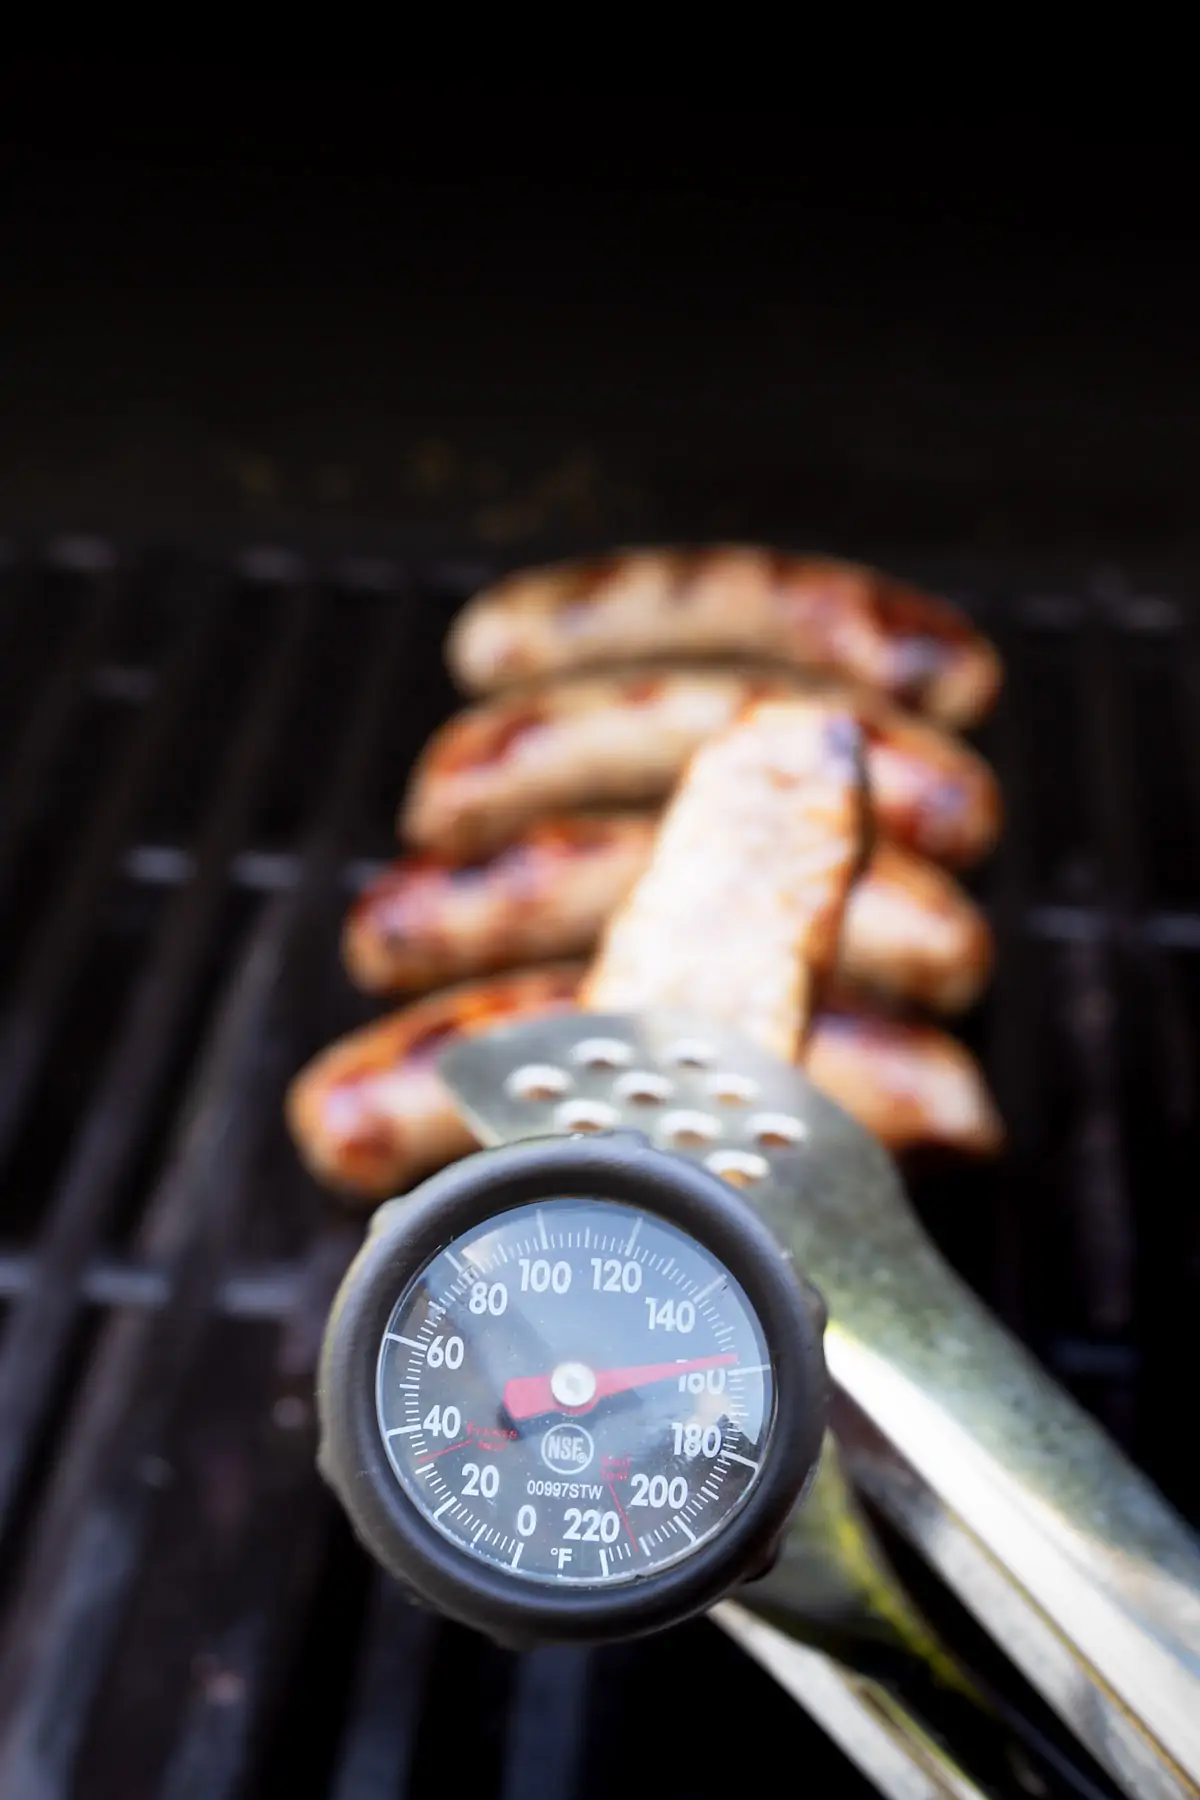 meat thermometer inserted into a brat, approaching 160 degrees.